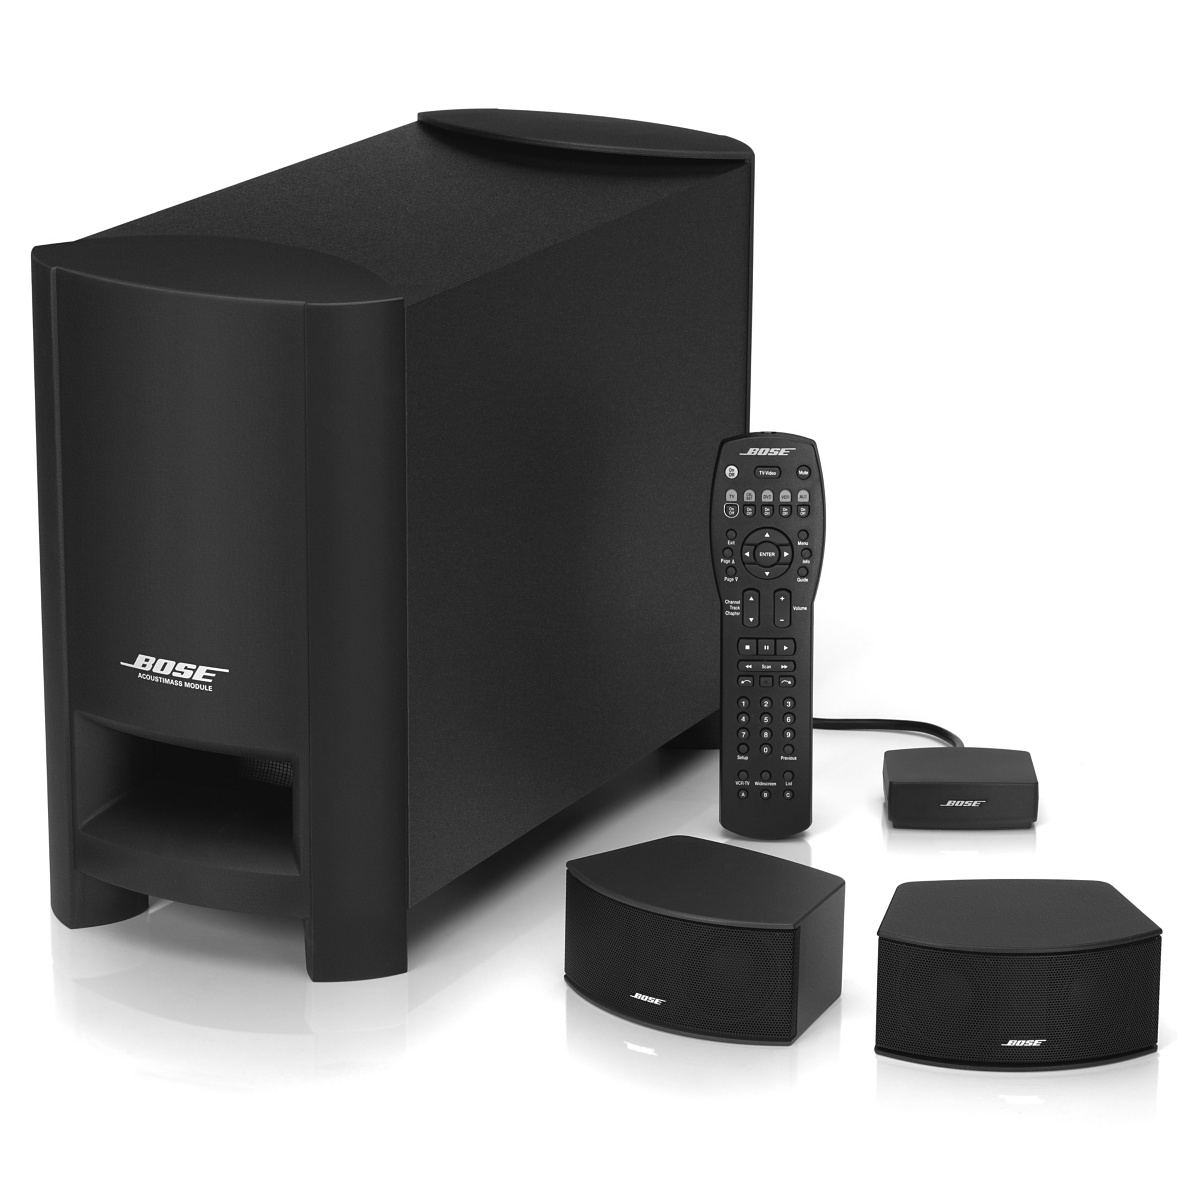 Bán Bose CineMate GS Series II Digital Home Theater Speaker System Nguyên thùng